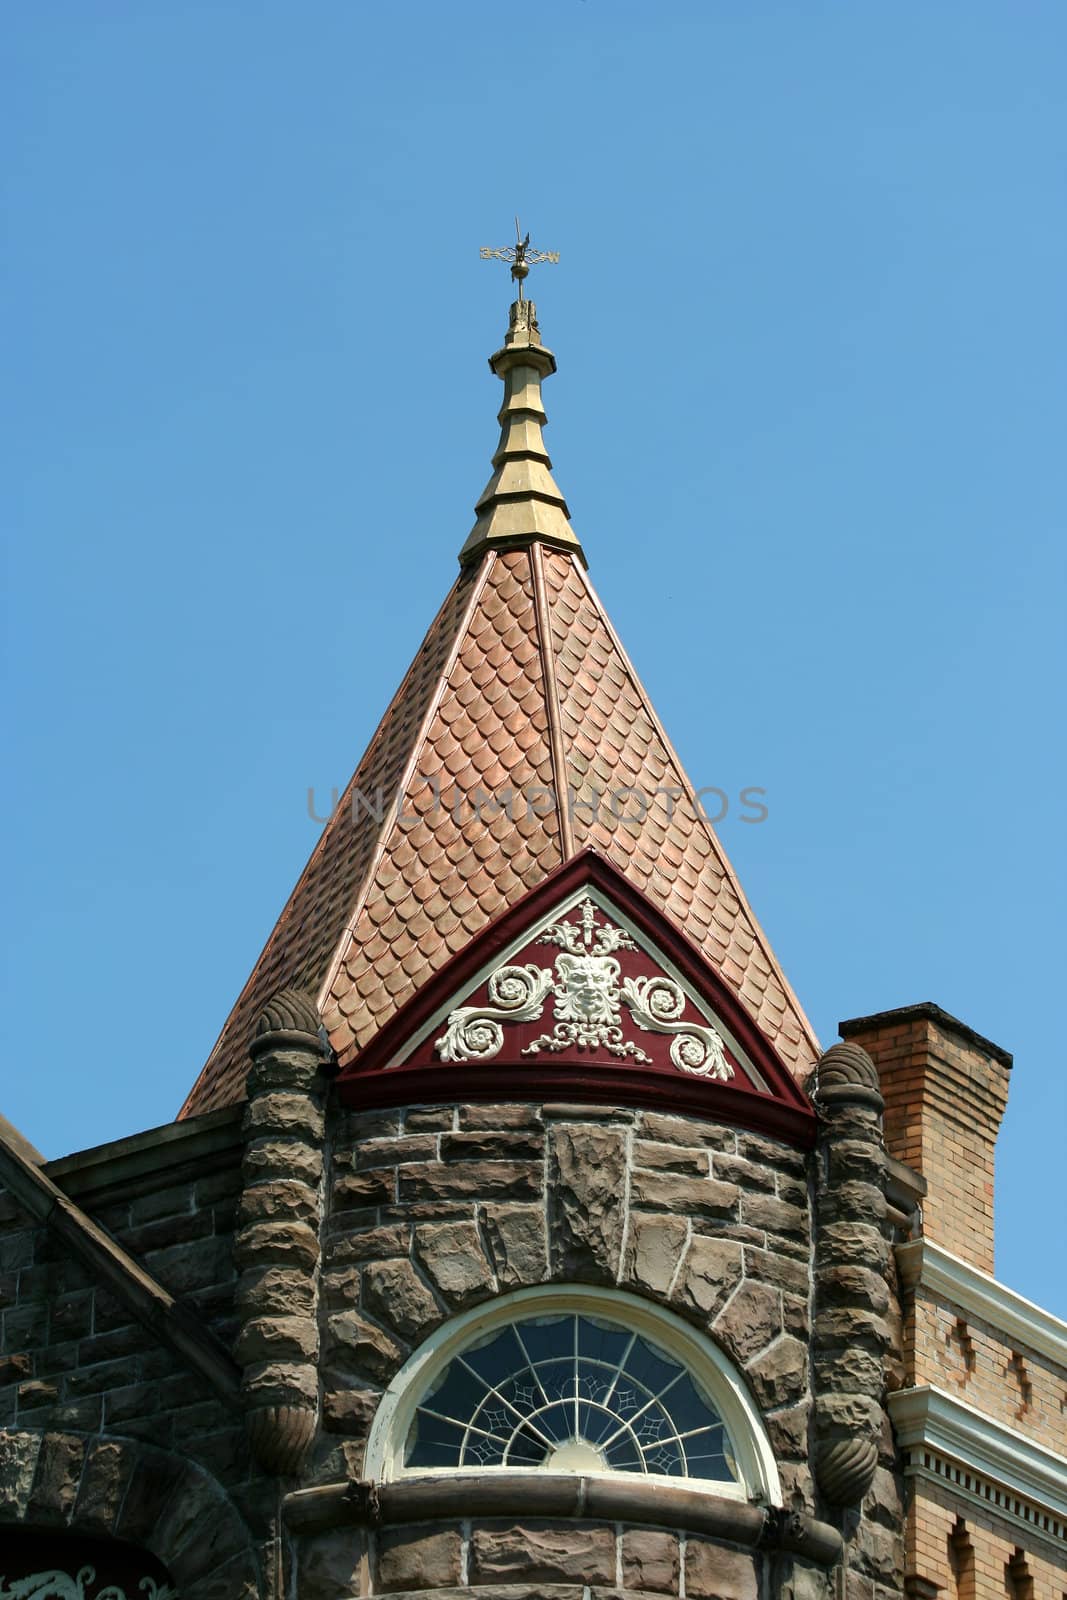 A Weather vane on top of an old building